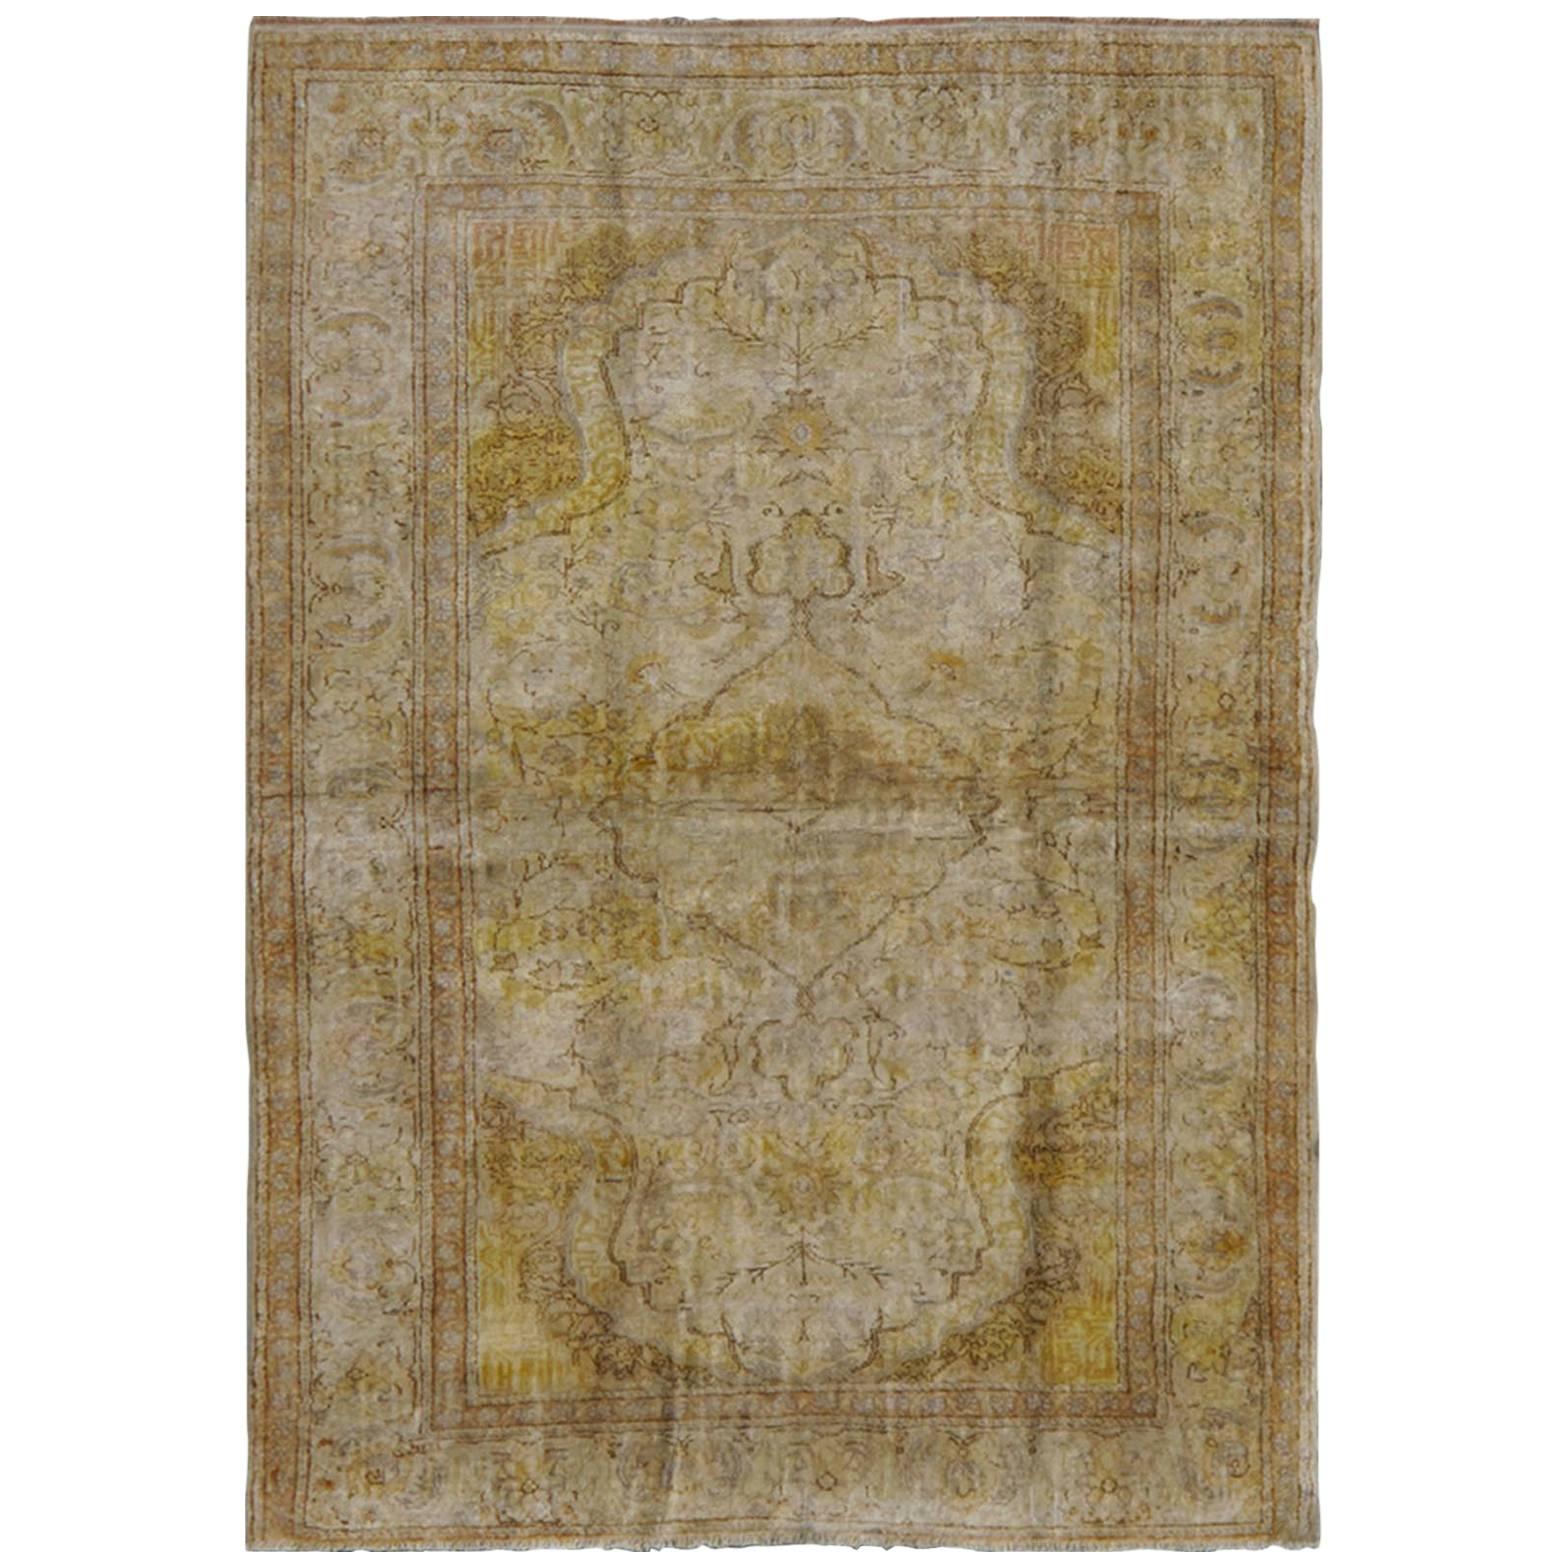 Silk Turkish Sivas Rug in Shades of Ivory, Brown and Yellow